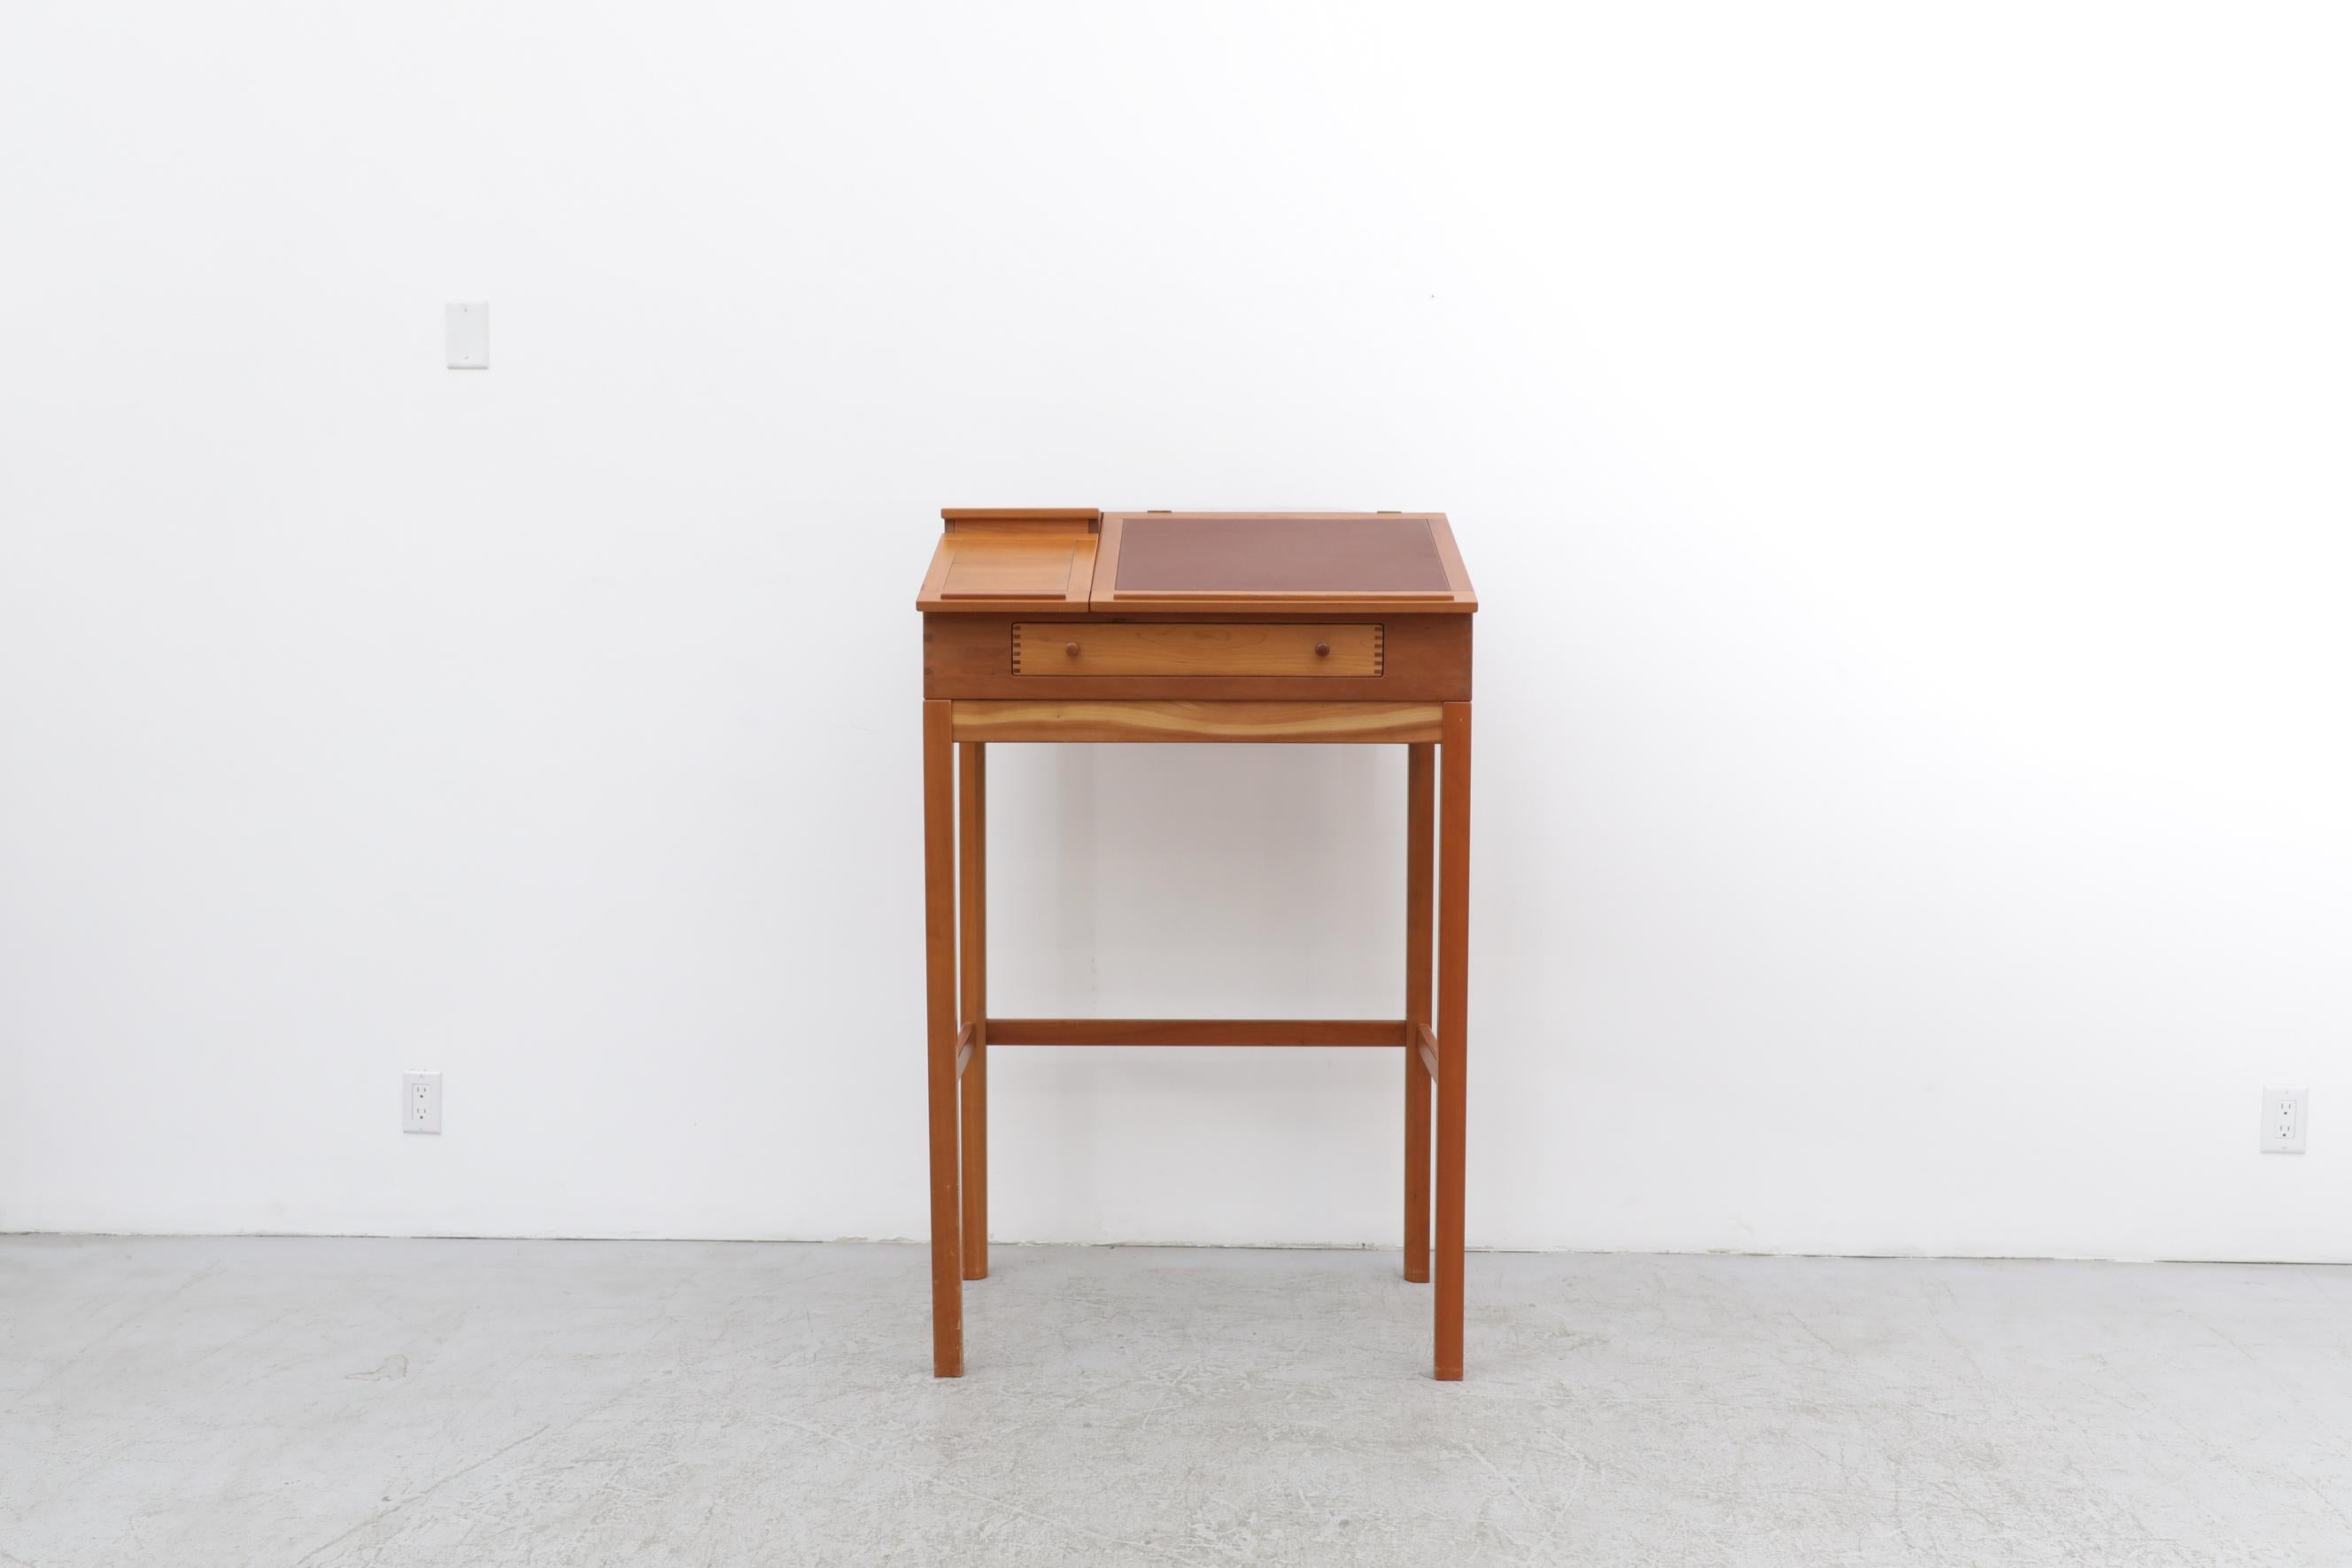 Mid-Century Lectern by Andreas Hansen, Denmark, 1960's. Outfitted with a padded vinyl writing surface, a small drawer, and Andreas Hansen's signature exposed finger joints. The top opens and has some small storage compartments. In original condition